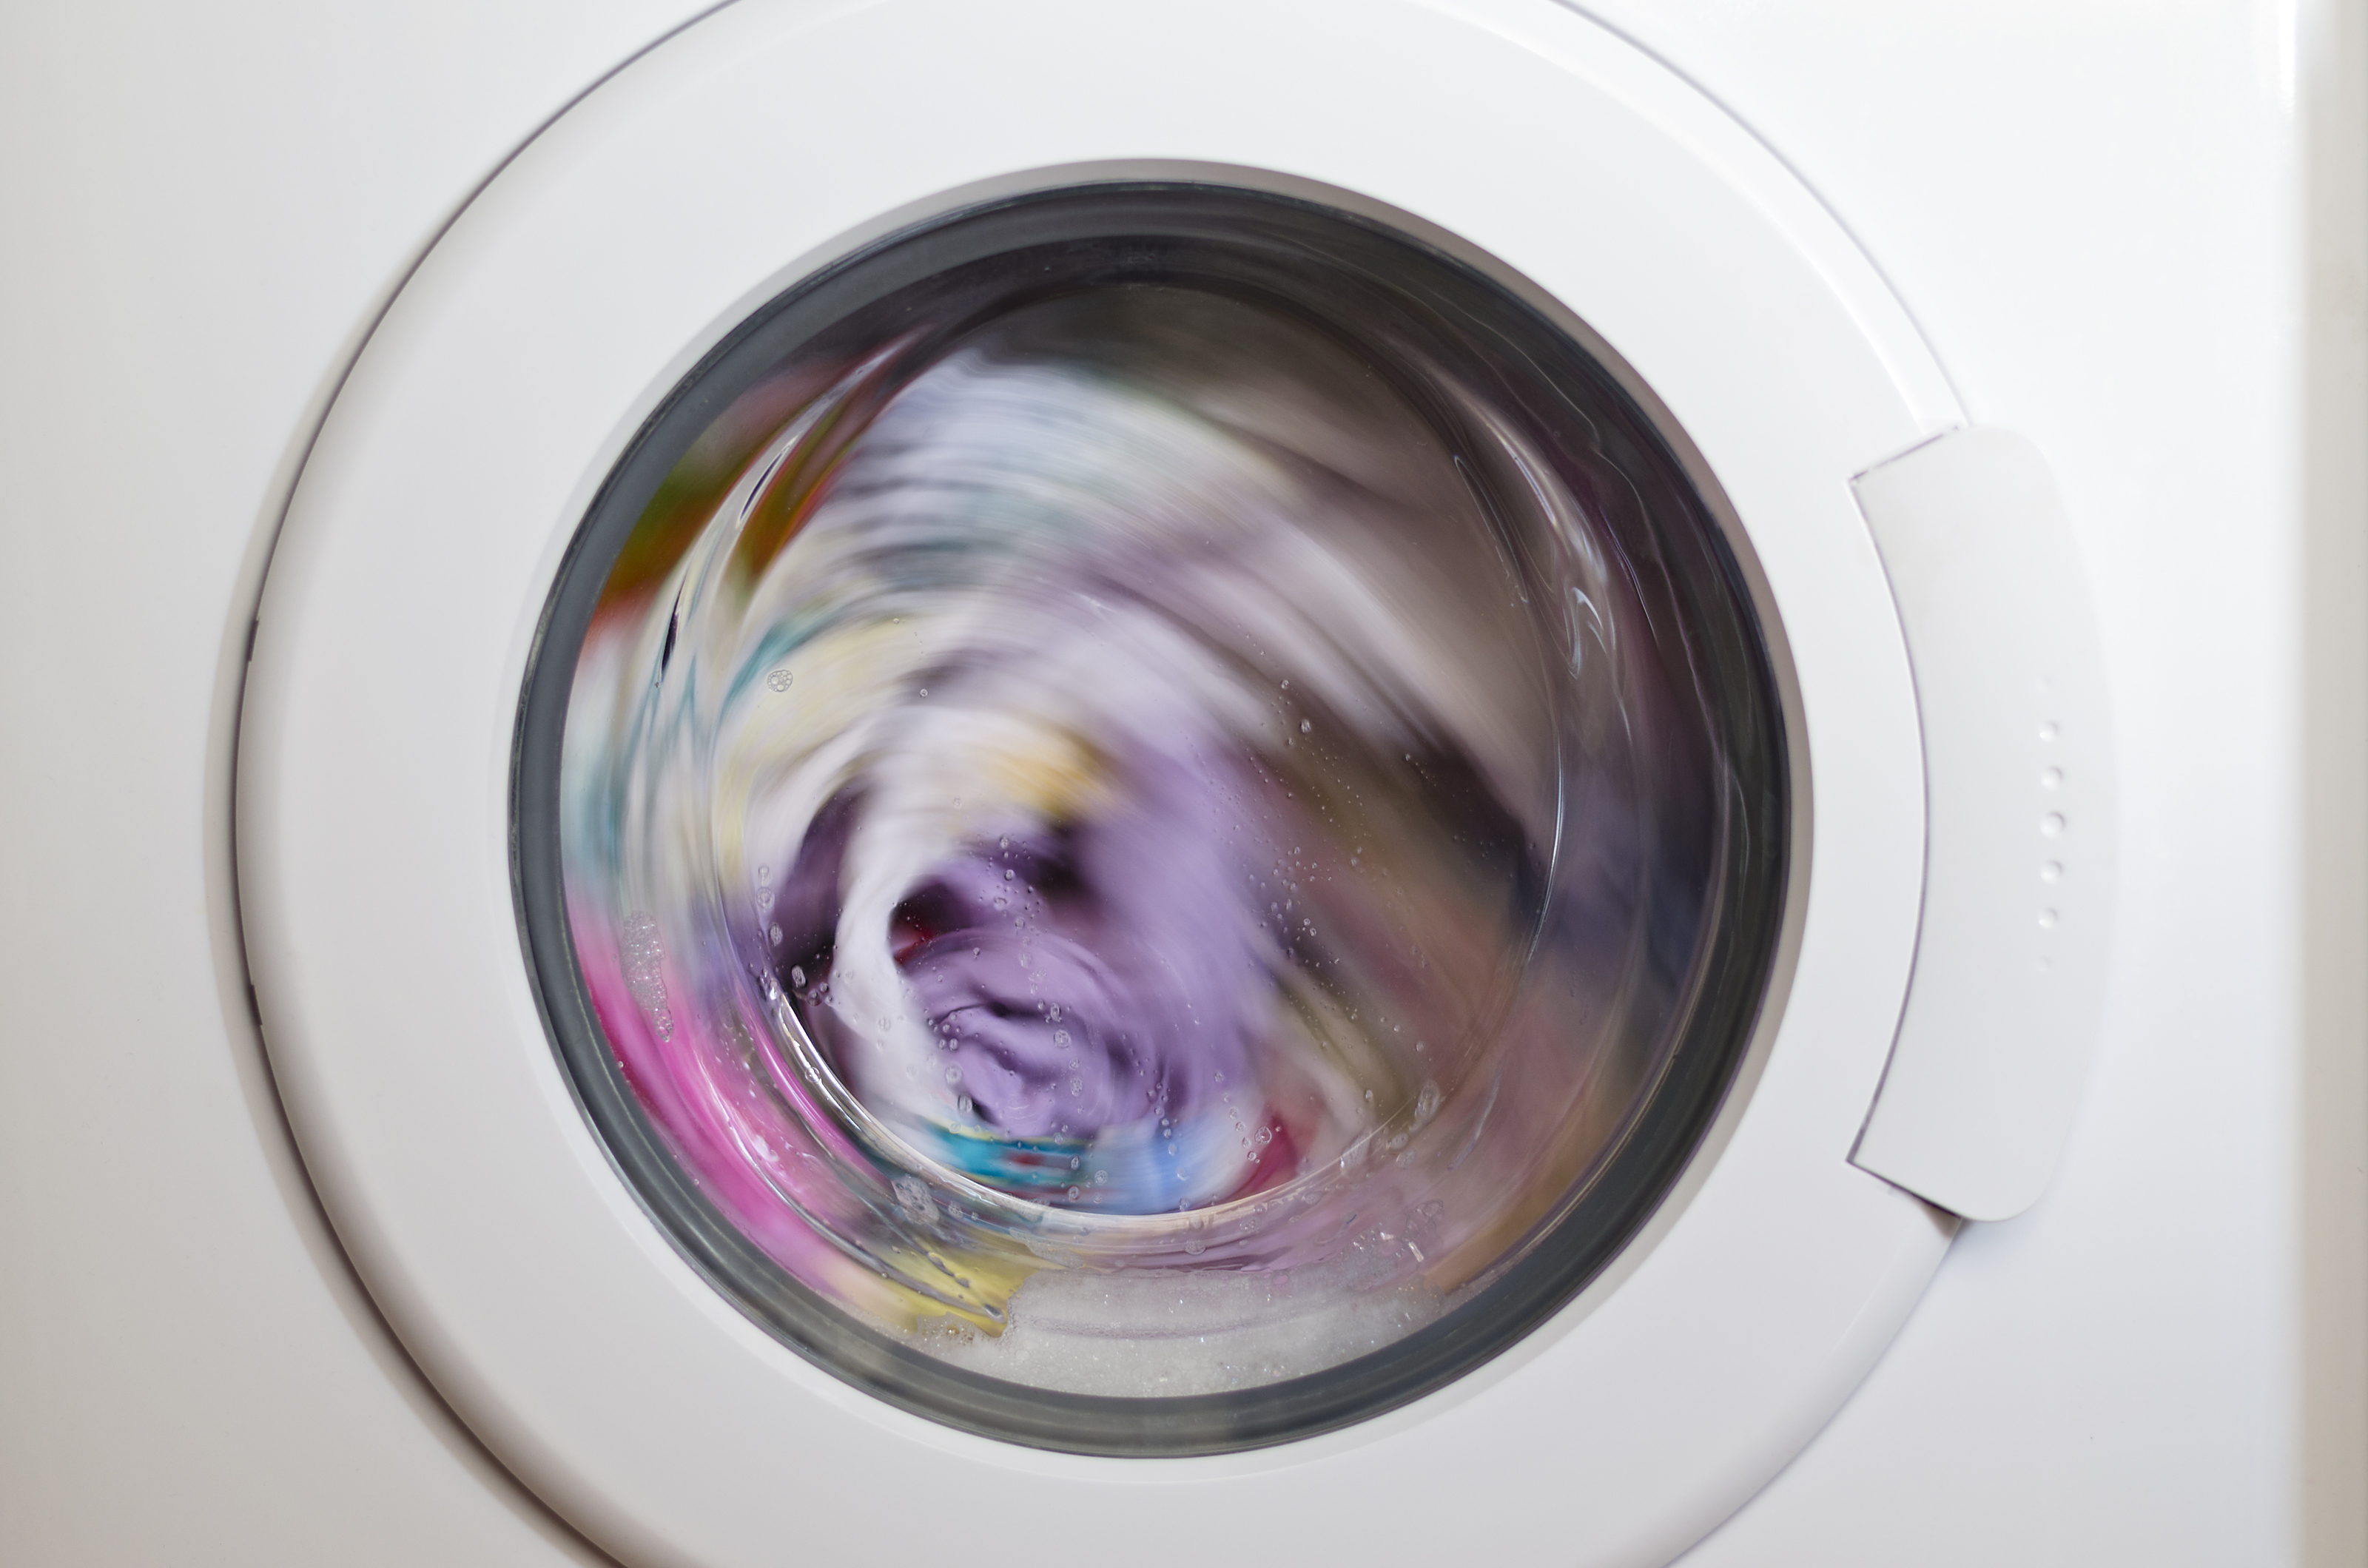 marks on washing after spin cycle